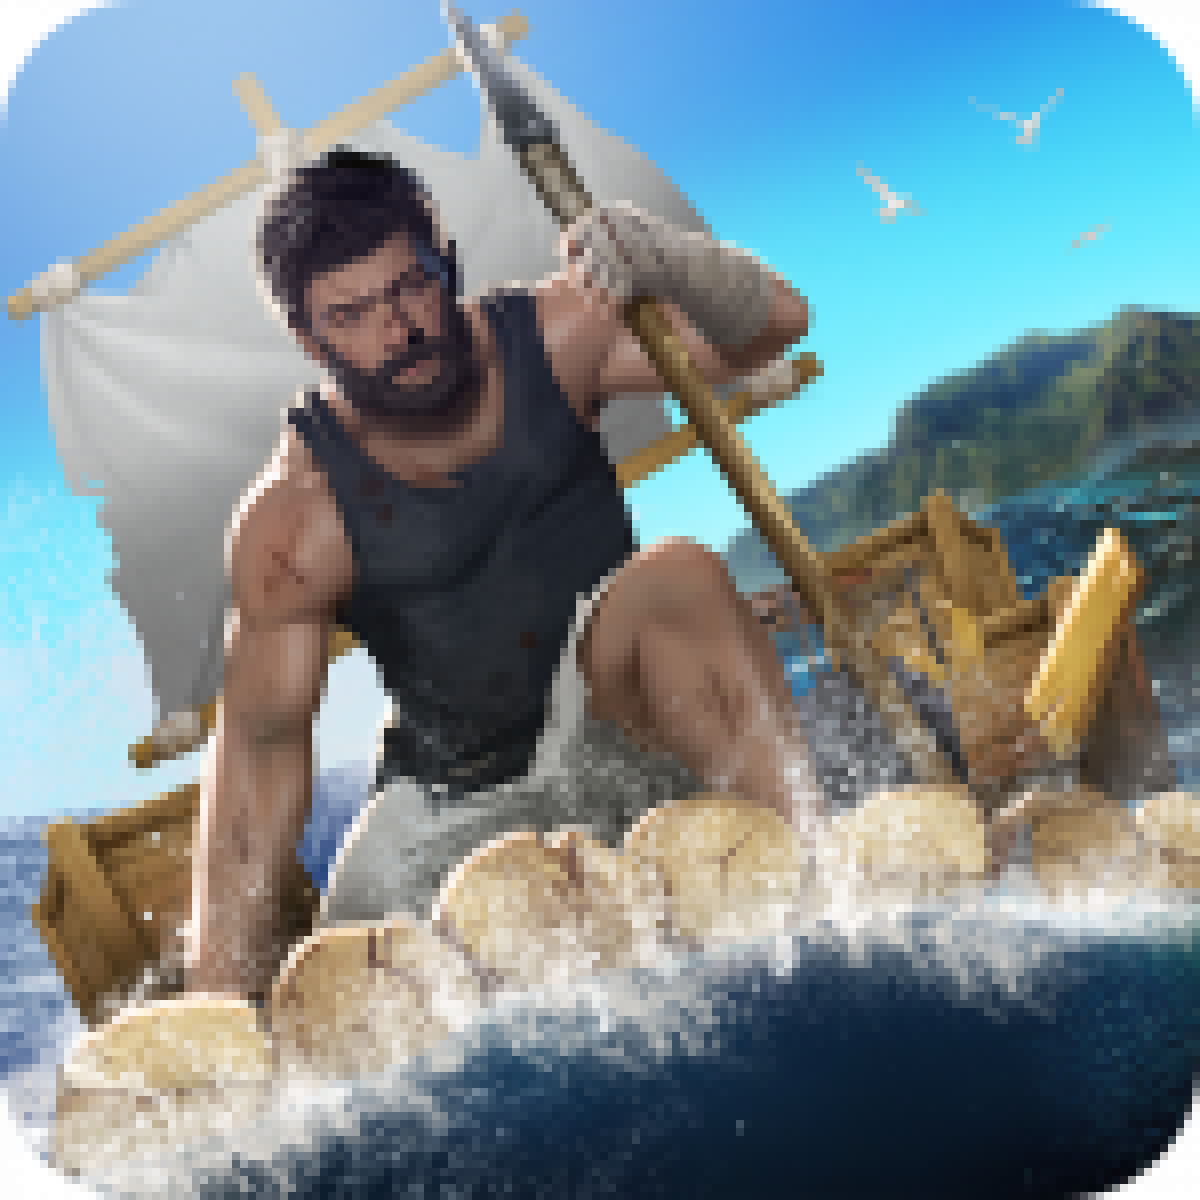 Ocean Survival Mod Apk 1 0 2 Download Unlimited Money For Android